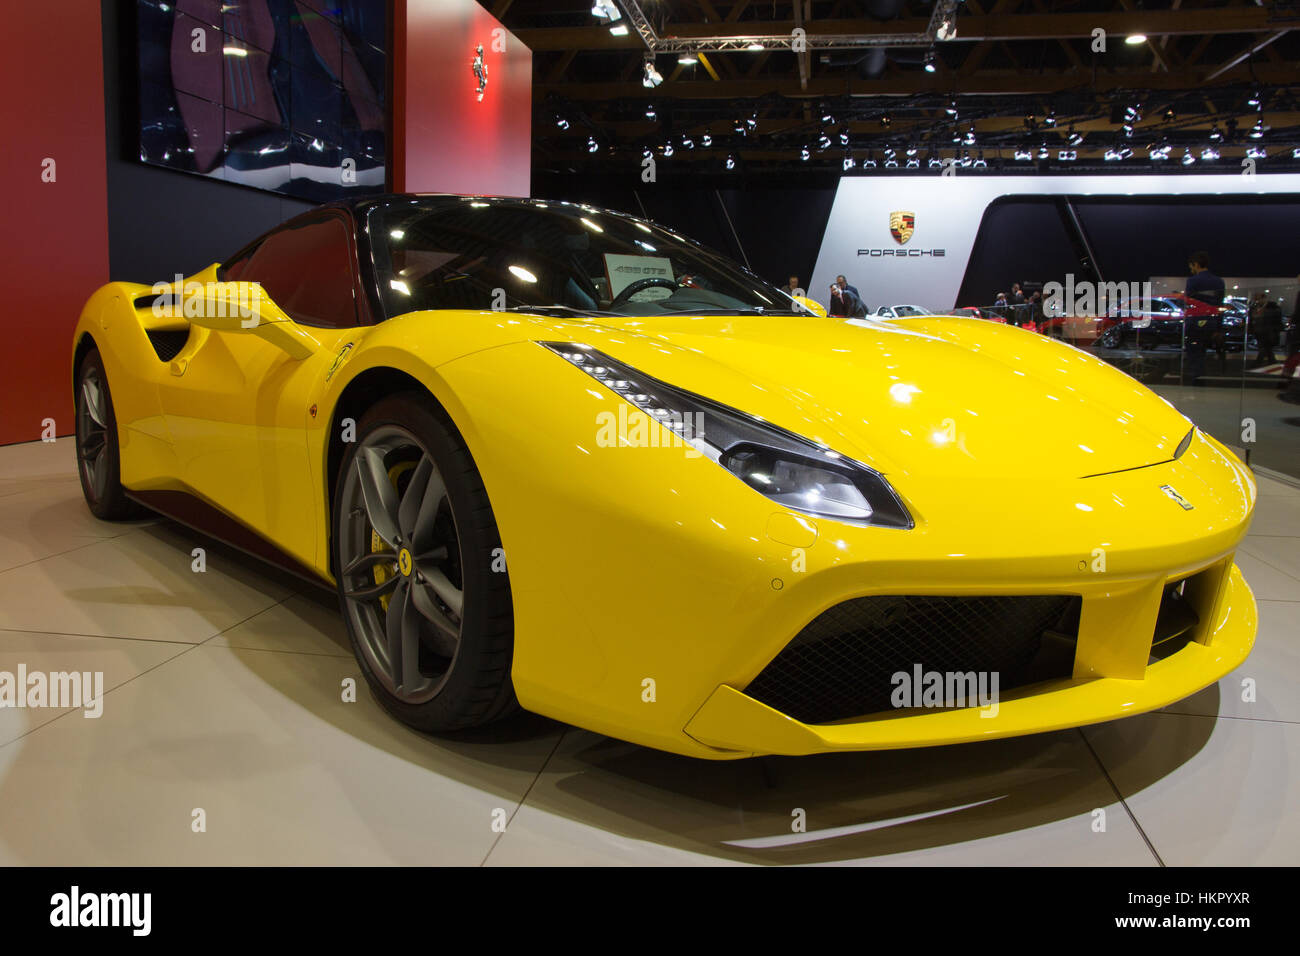 BRUSSELS - JAN 12, 2016: Yellow Ferrari 488GTB Spider sports car shown at the Brussels Motor Show. Stock Photo